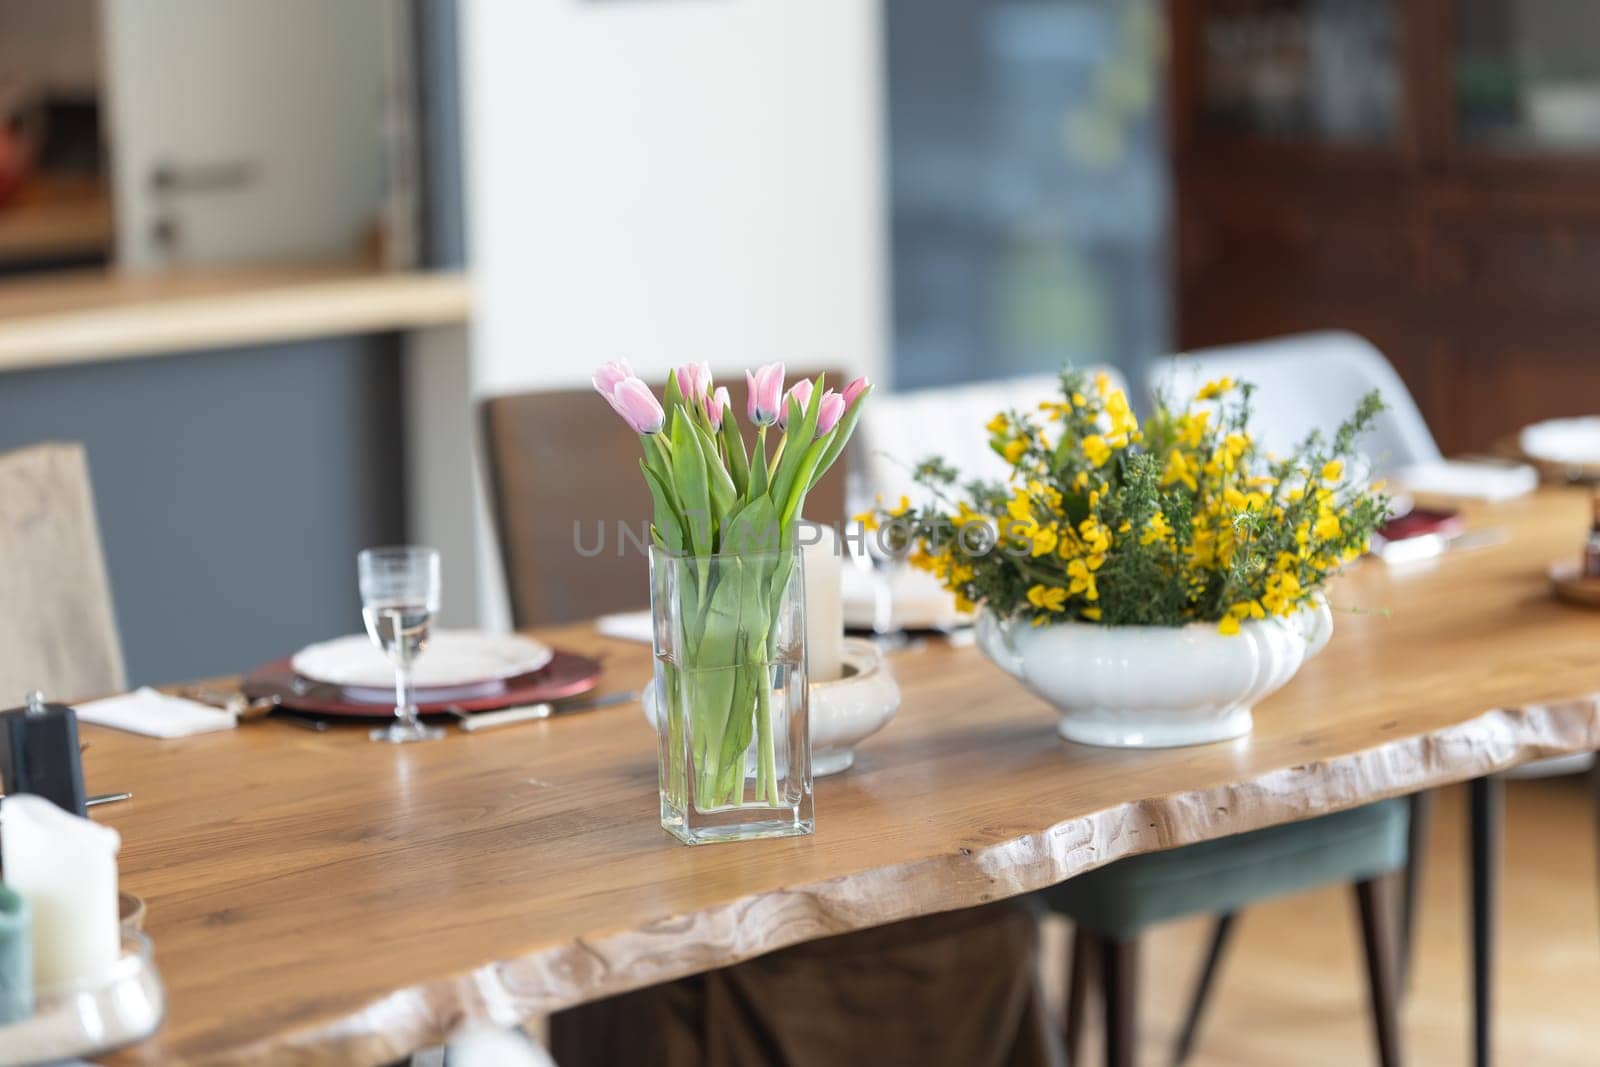 a vase with flowers on the dining table is a festive setting by Studia72